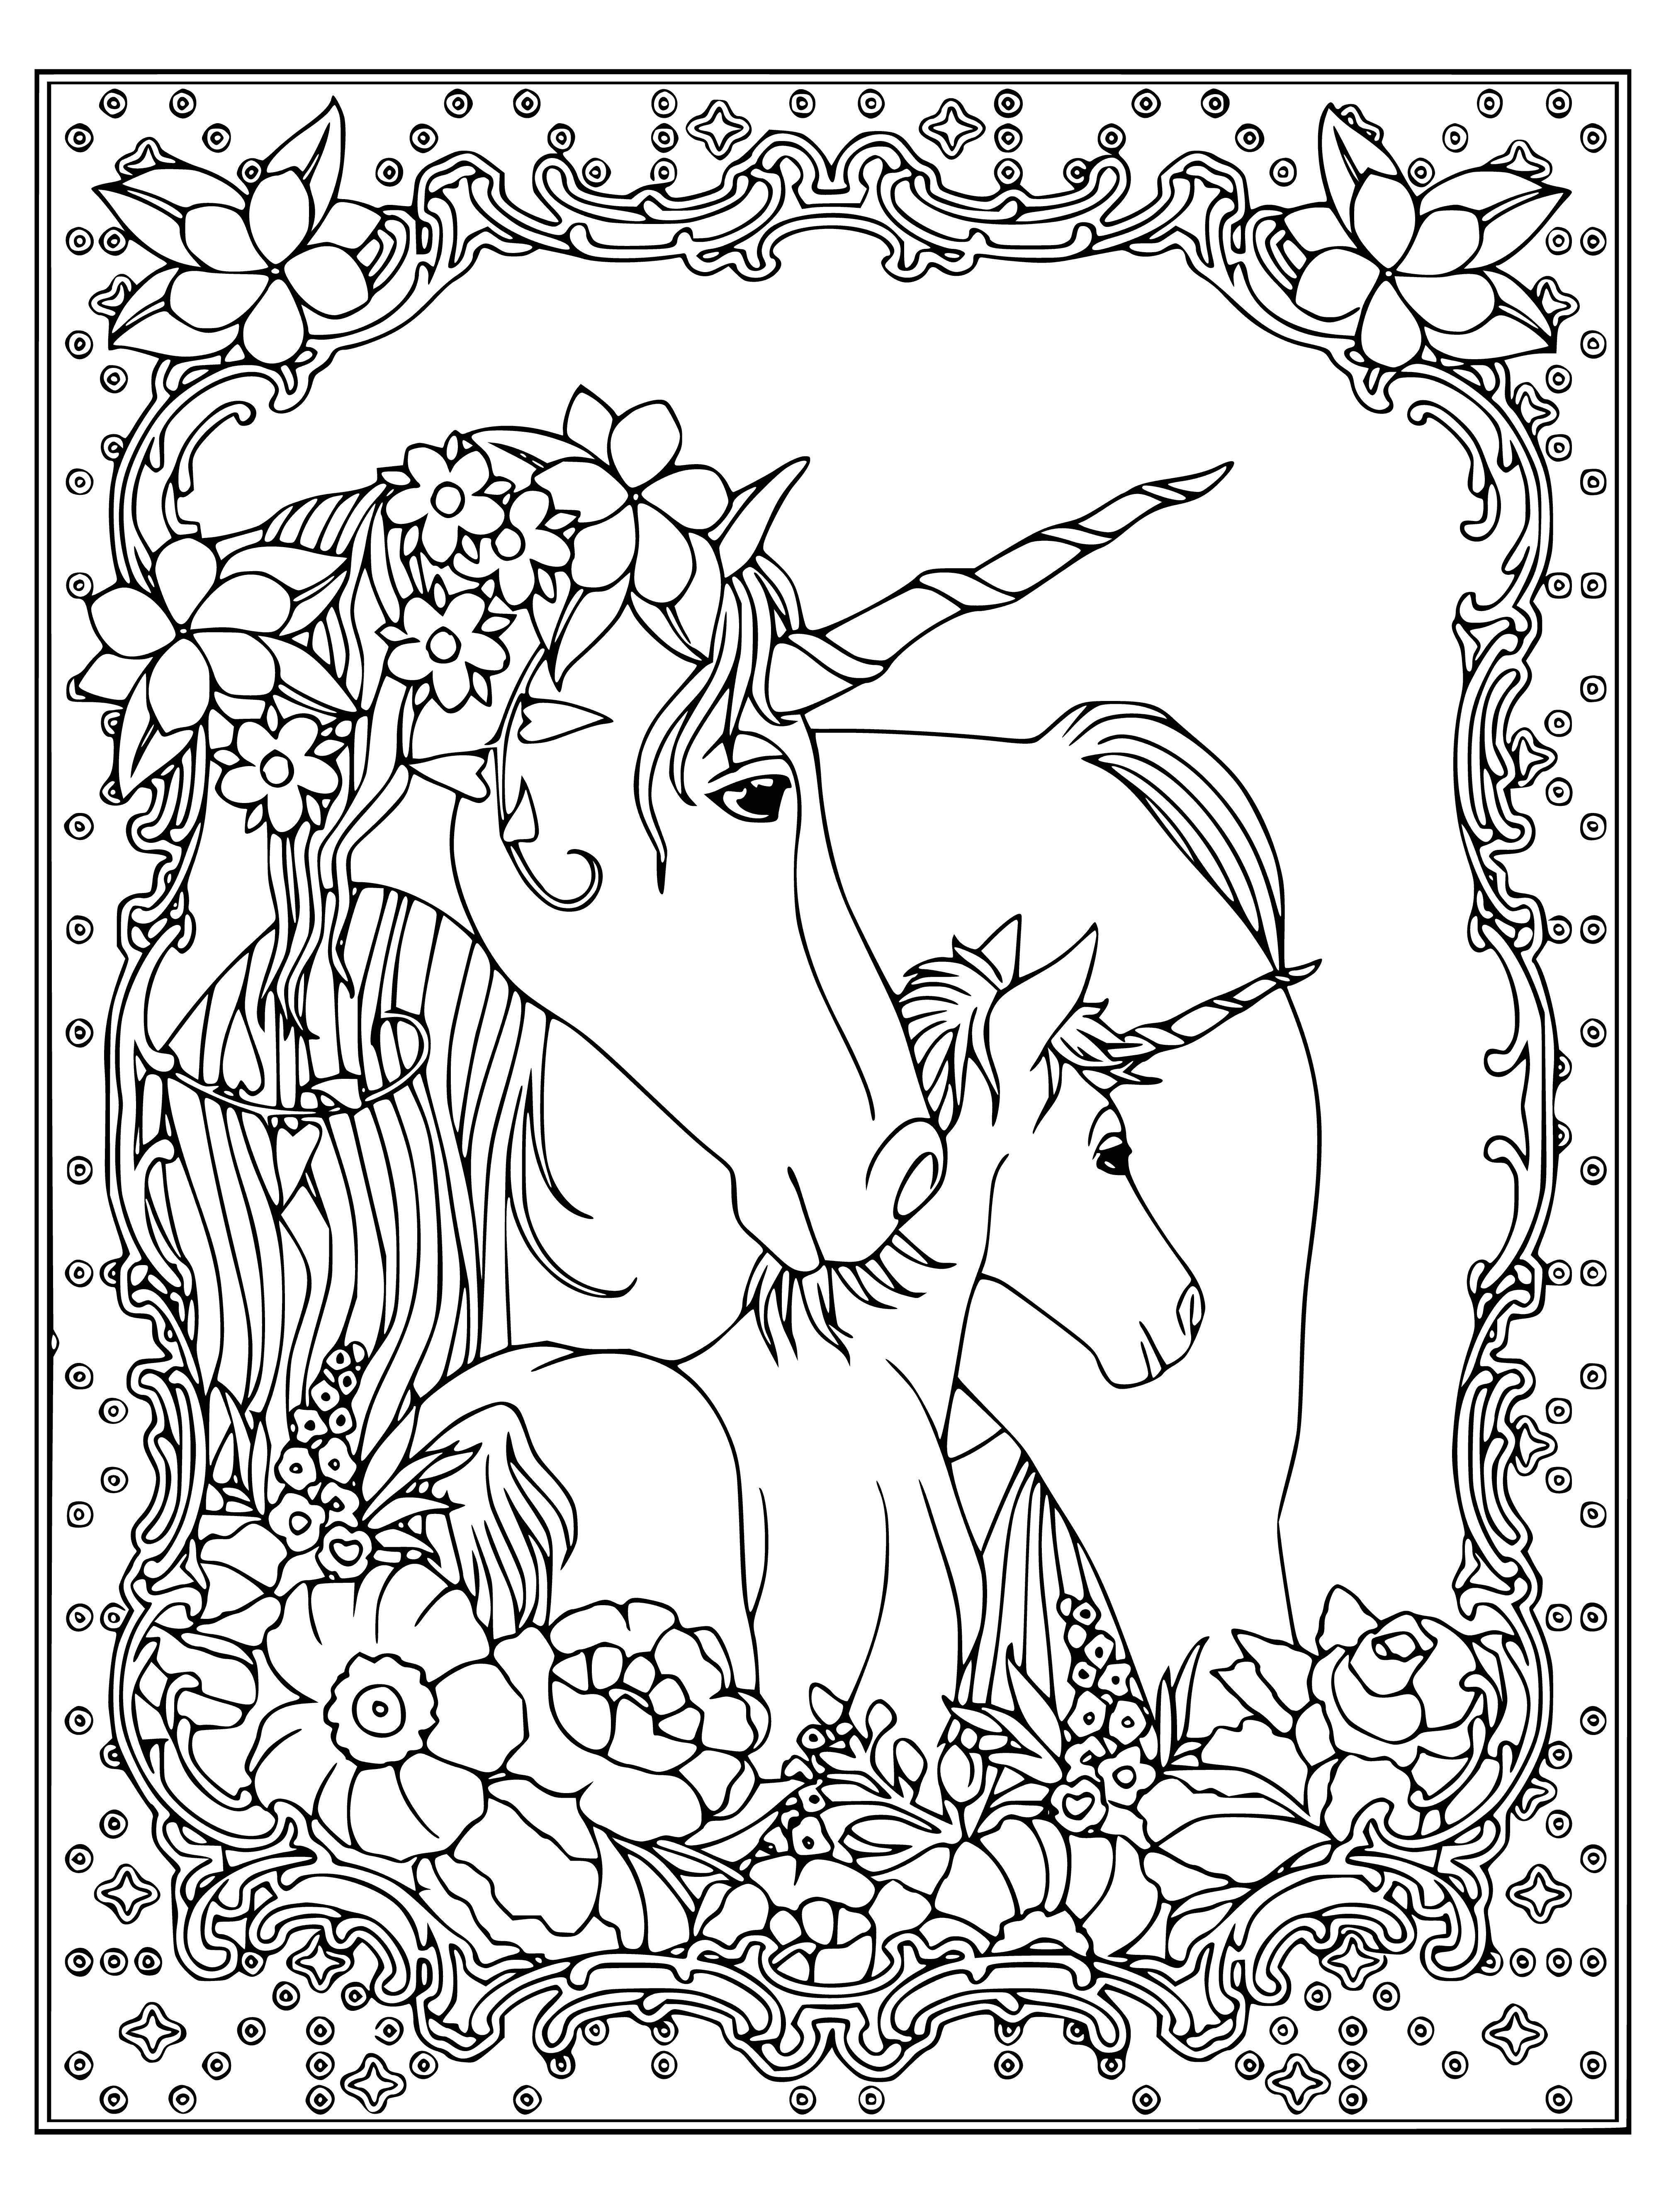 coloring page: Two unicorns, entwined and eyes closed, surrounded by a pattern of stars and flowers. #magical